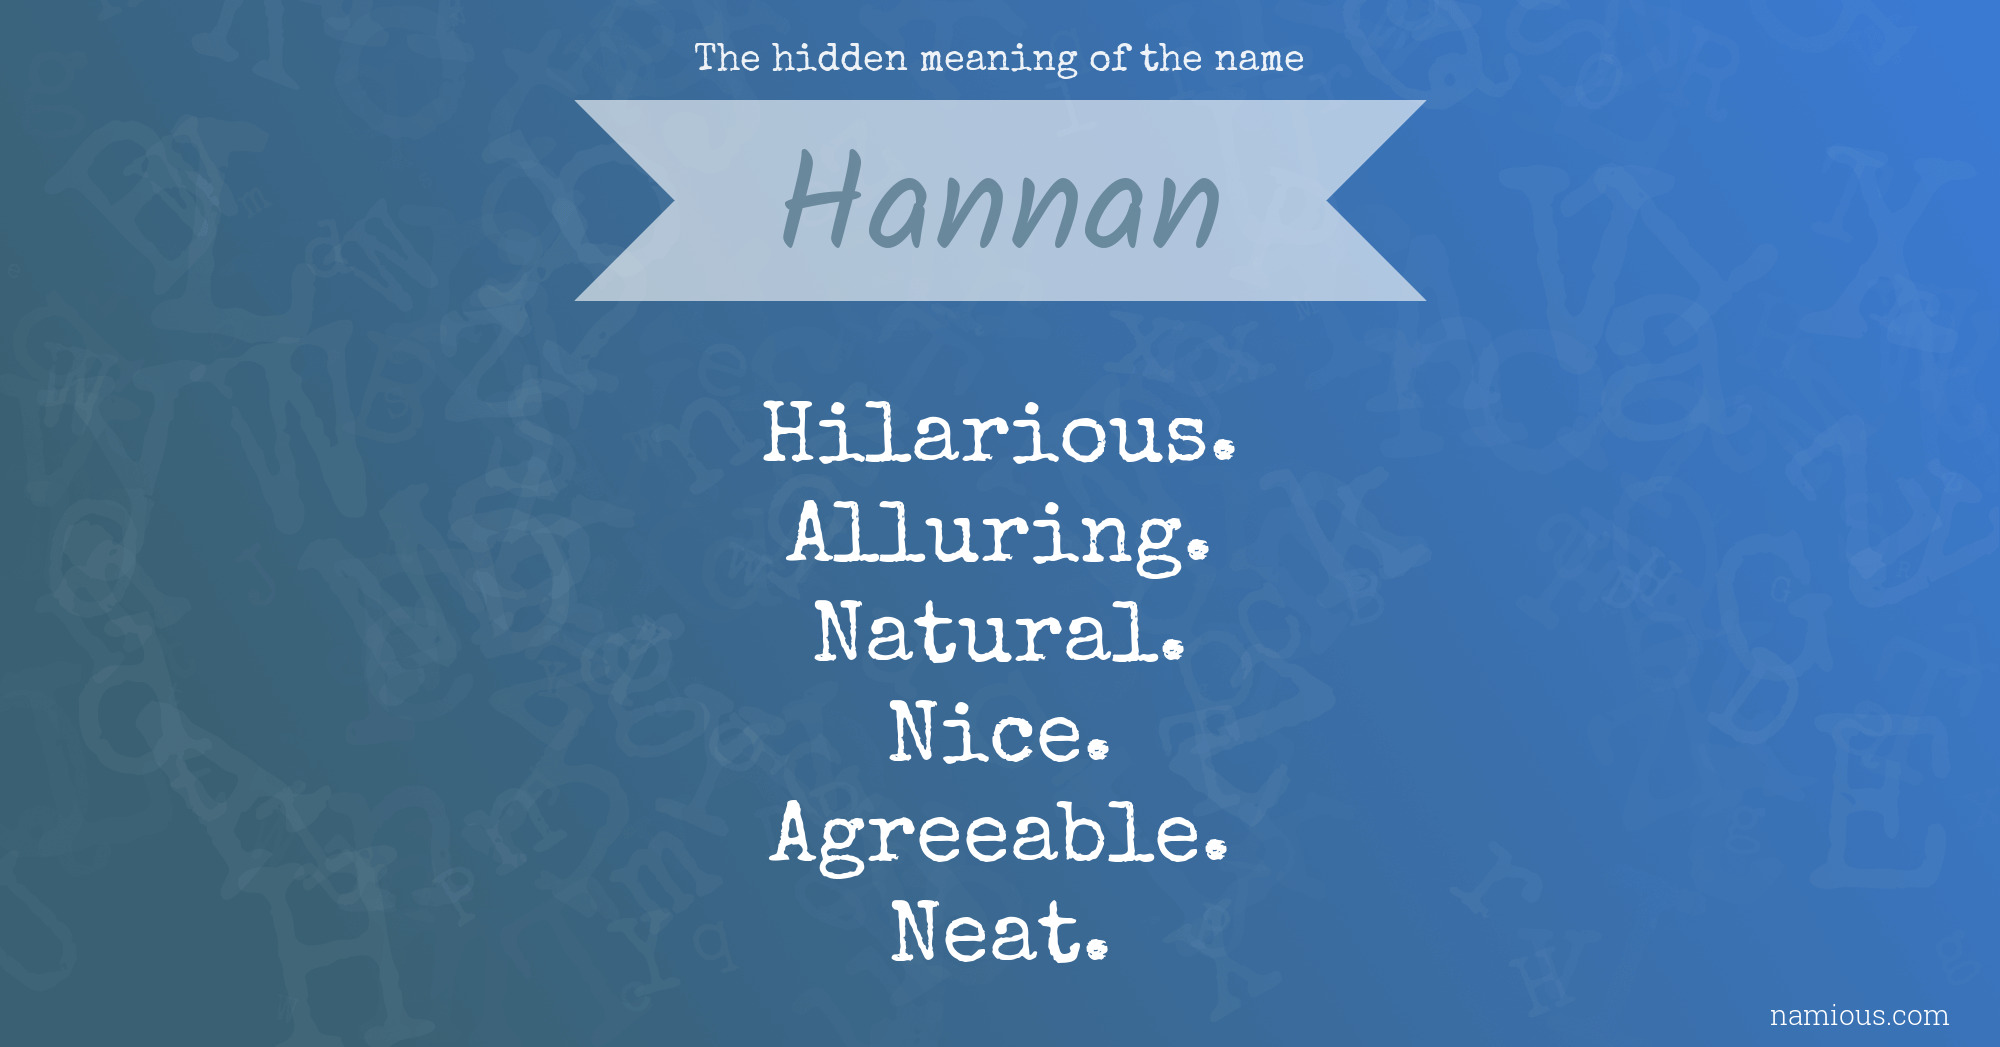 The hidden meaning of the name Hannan